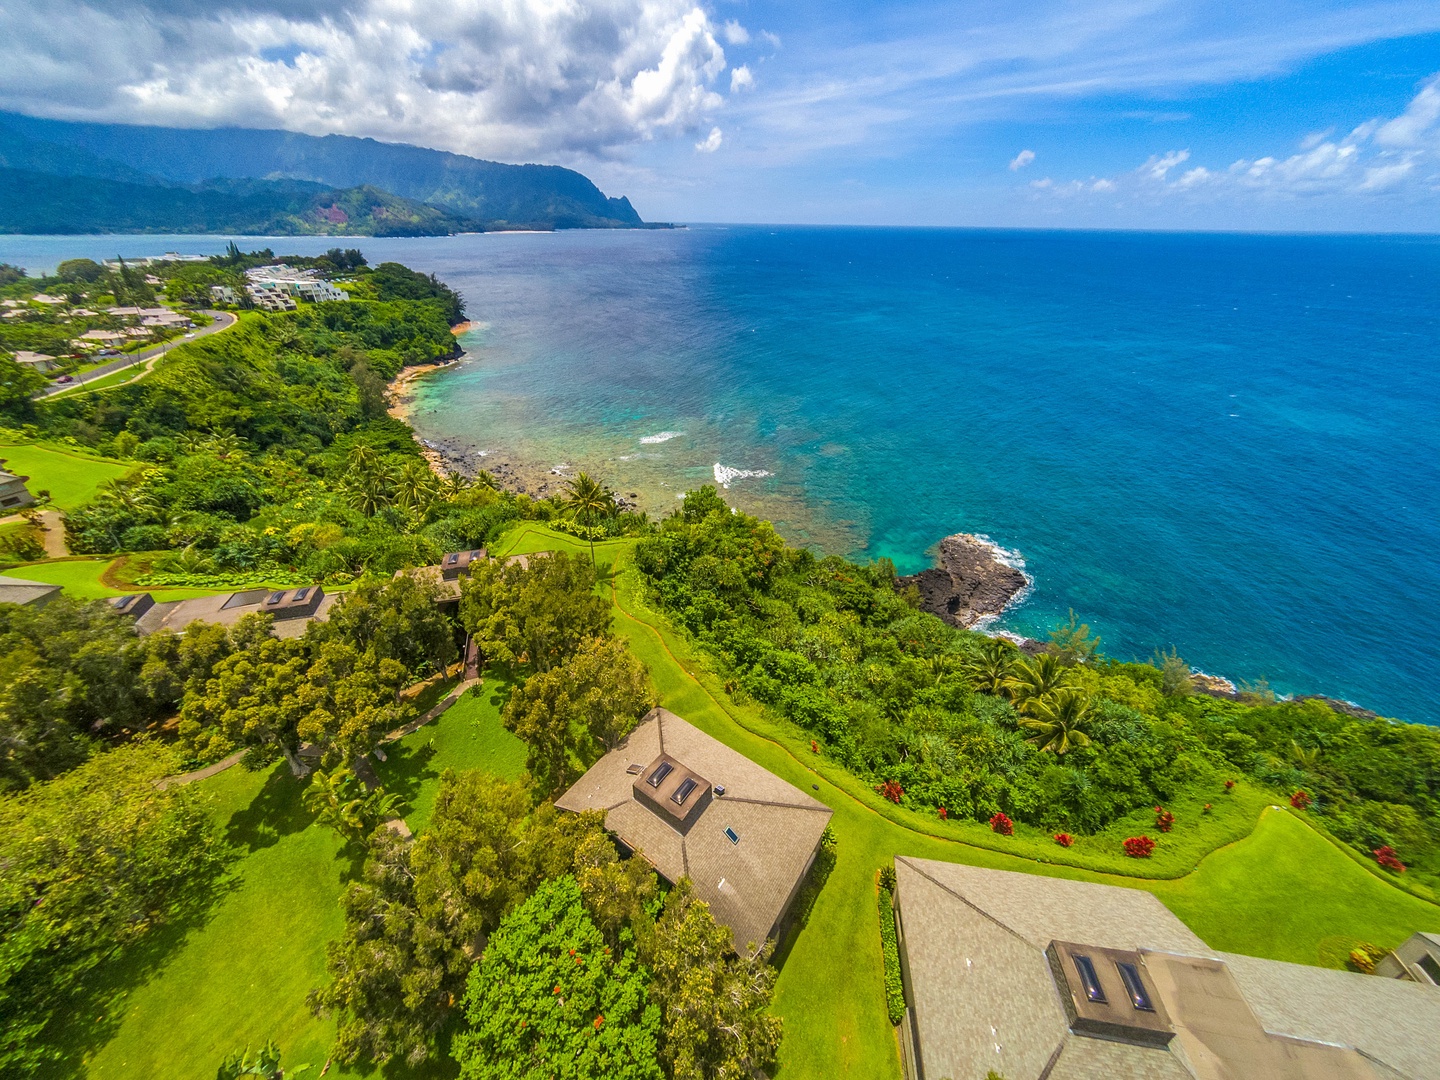 Princeville Vacation Rentals, Pali Ke Kua 207 - Pali Ke Kua 207, located in the exclusive neighborhood of Princeville on the North Shore of Kaua’i, is a resort condominium perched on top of a bluff 200 feet above the crystalline Pacific Ocean